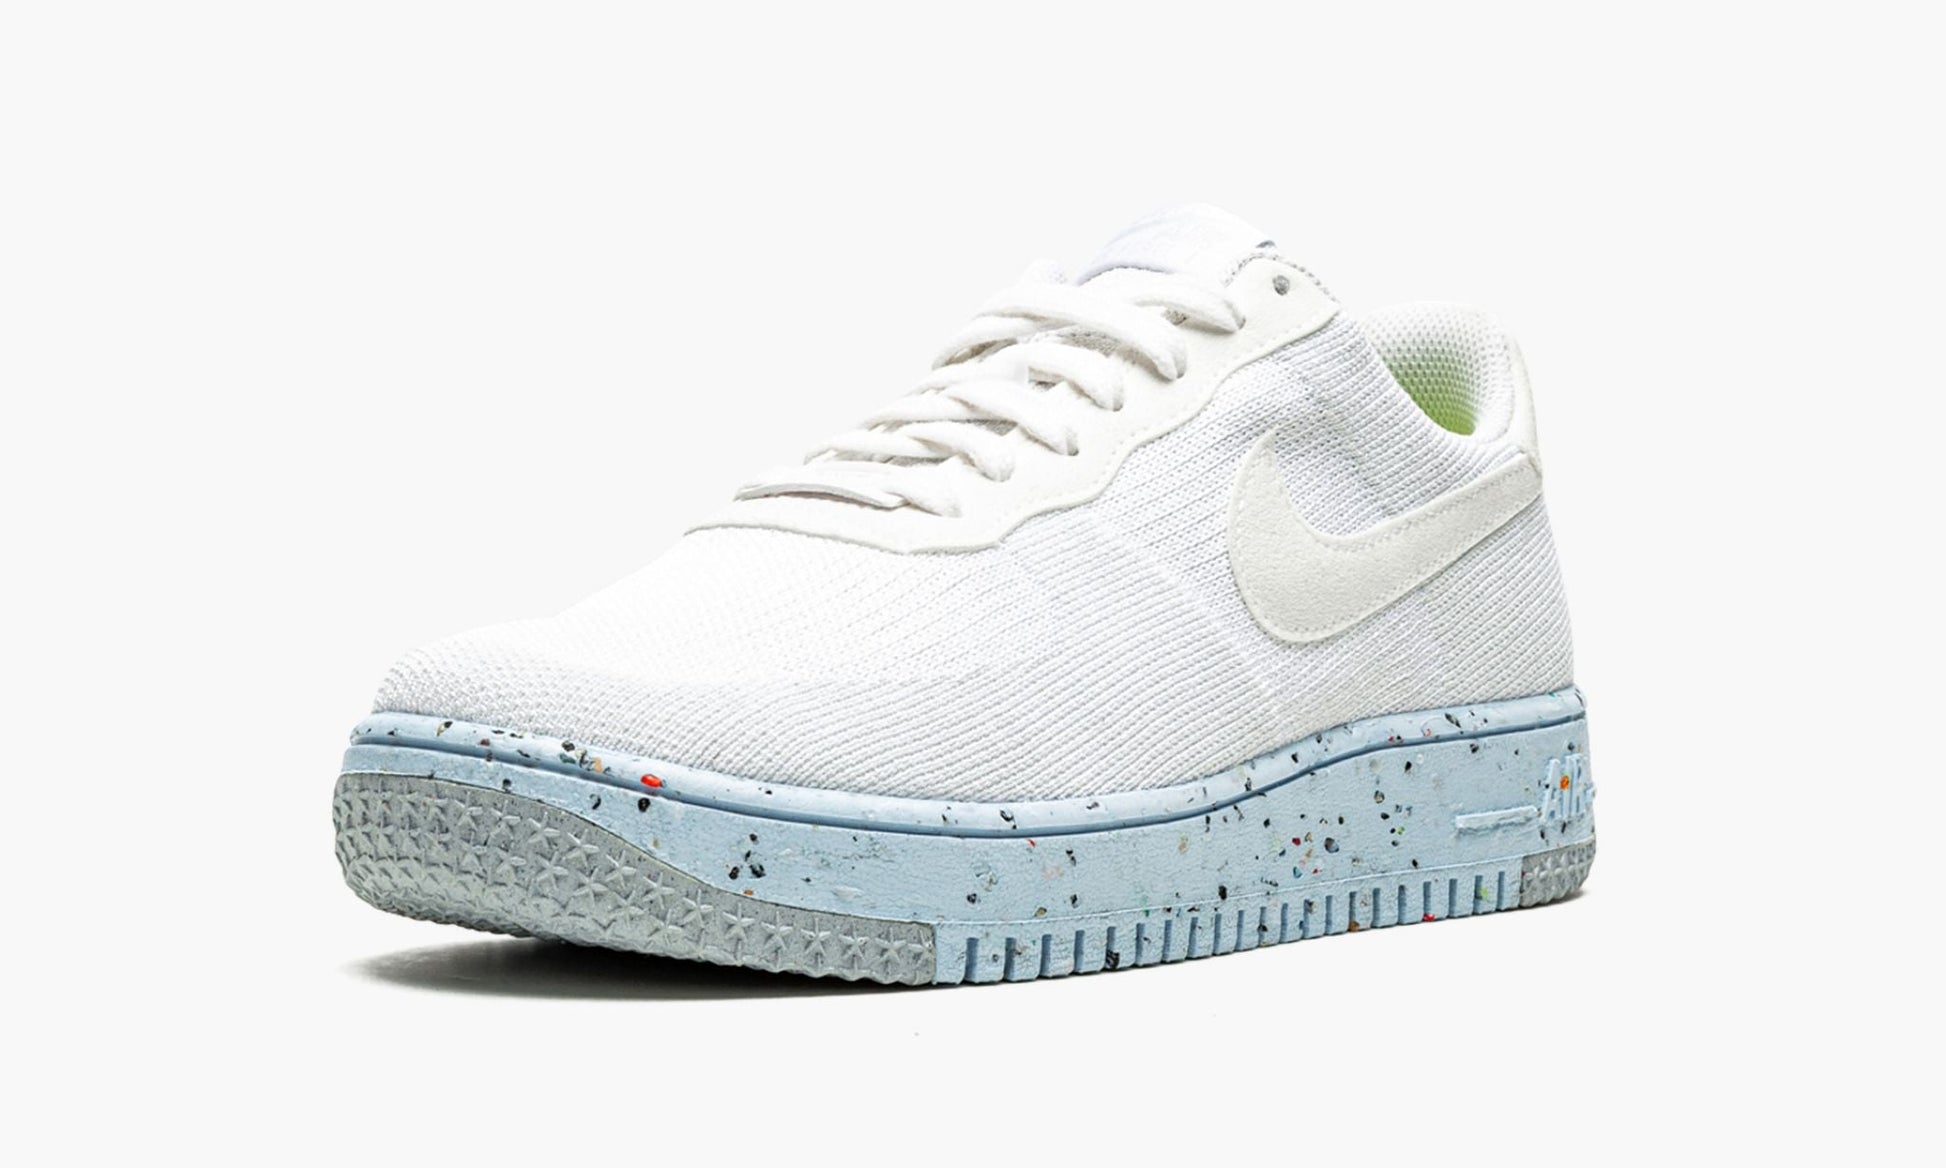 WMNS Air Force 1 Crater Flykni "White"